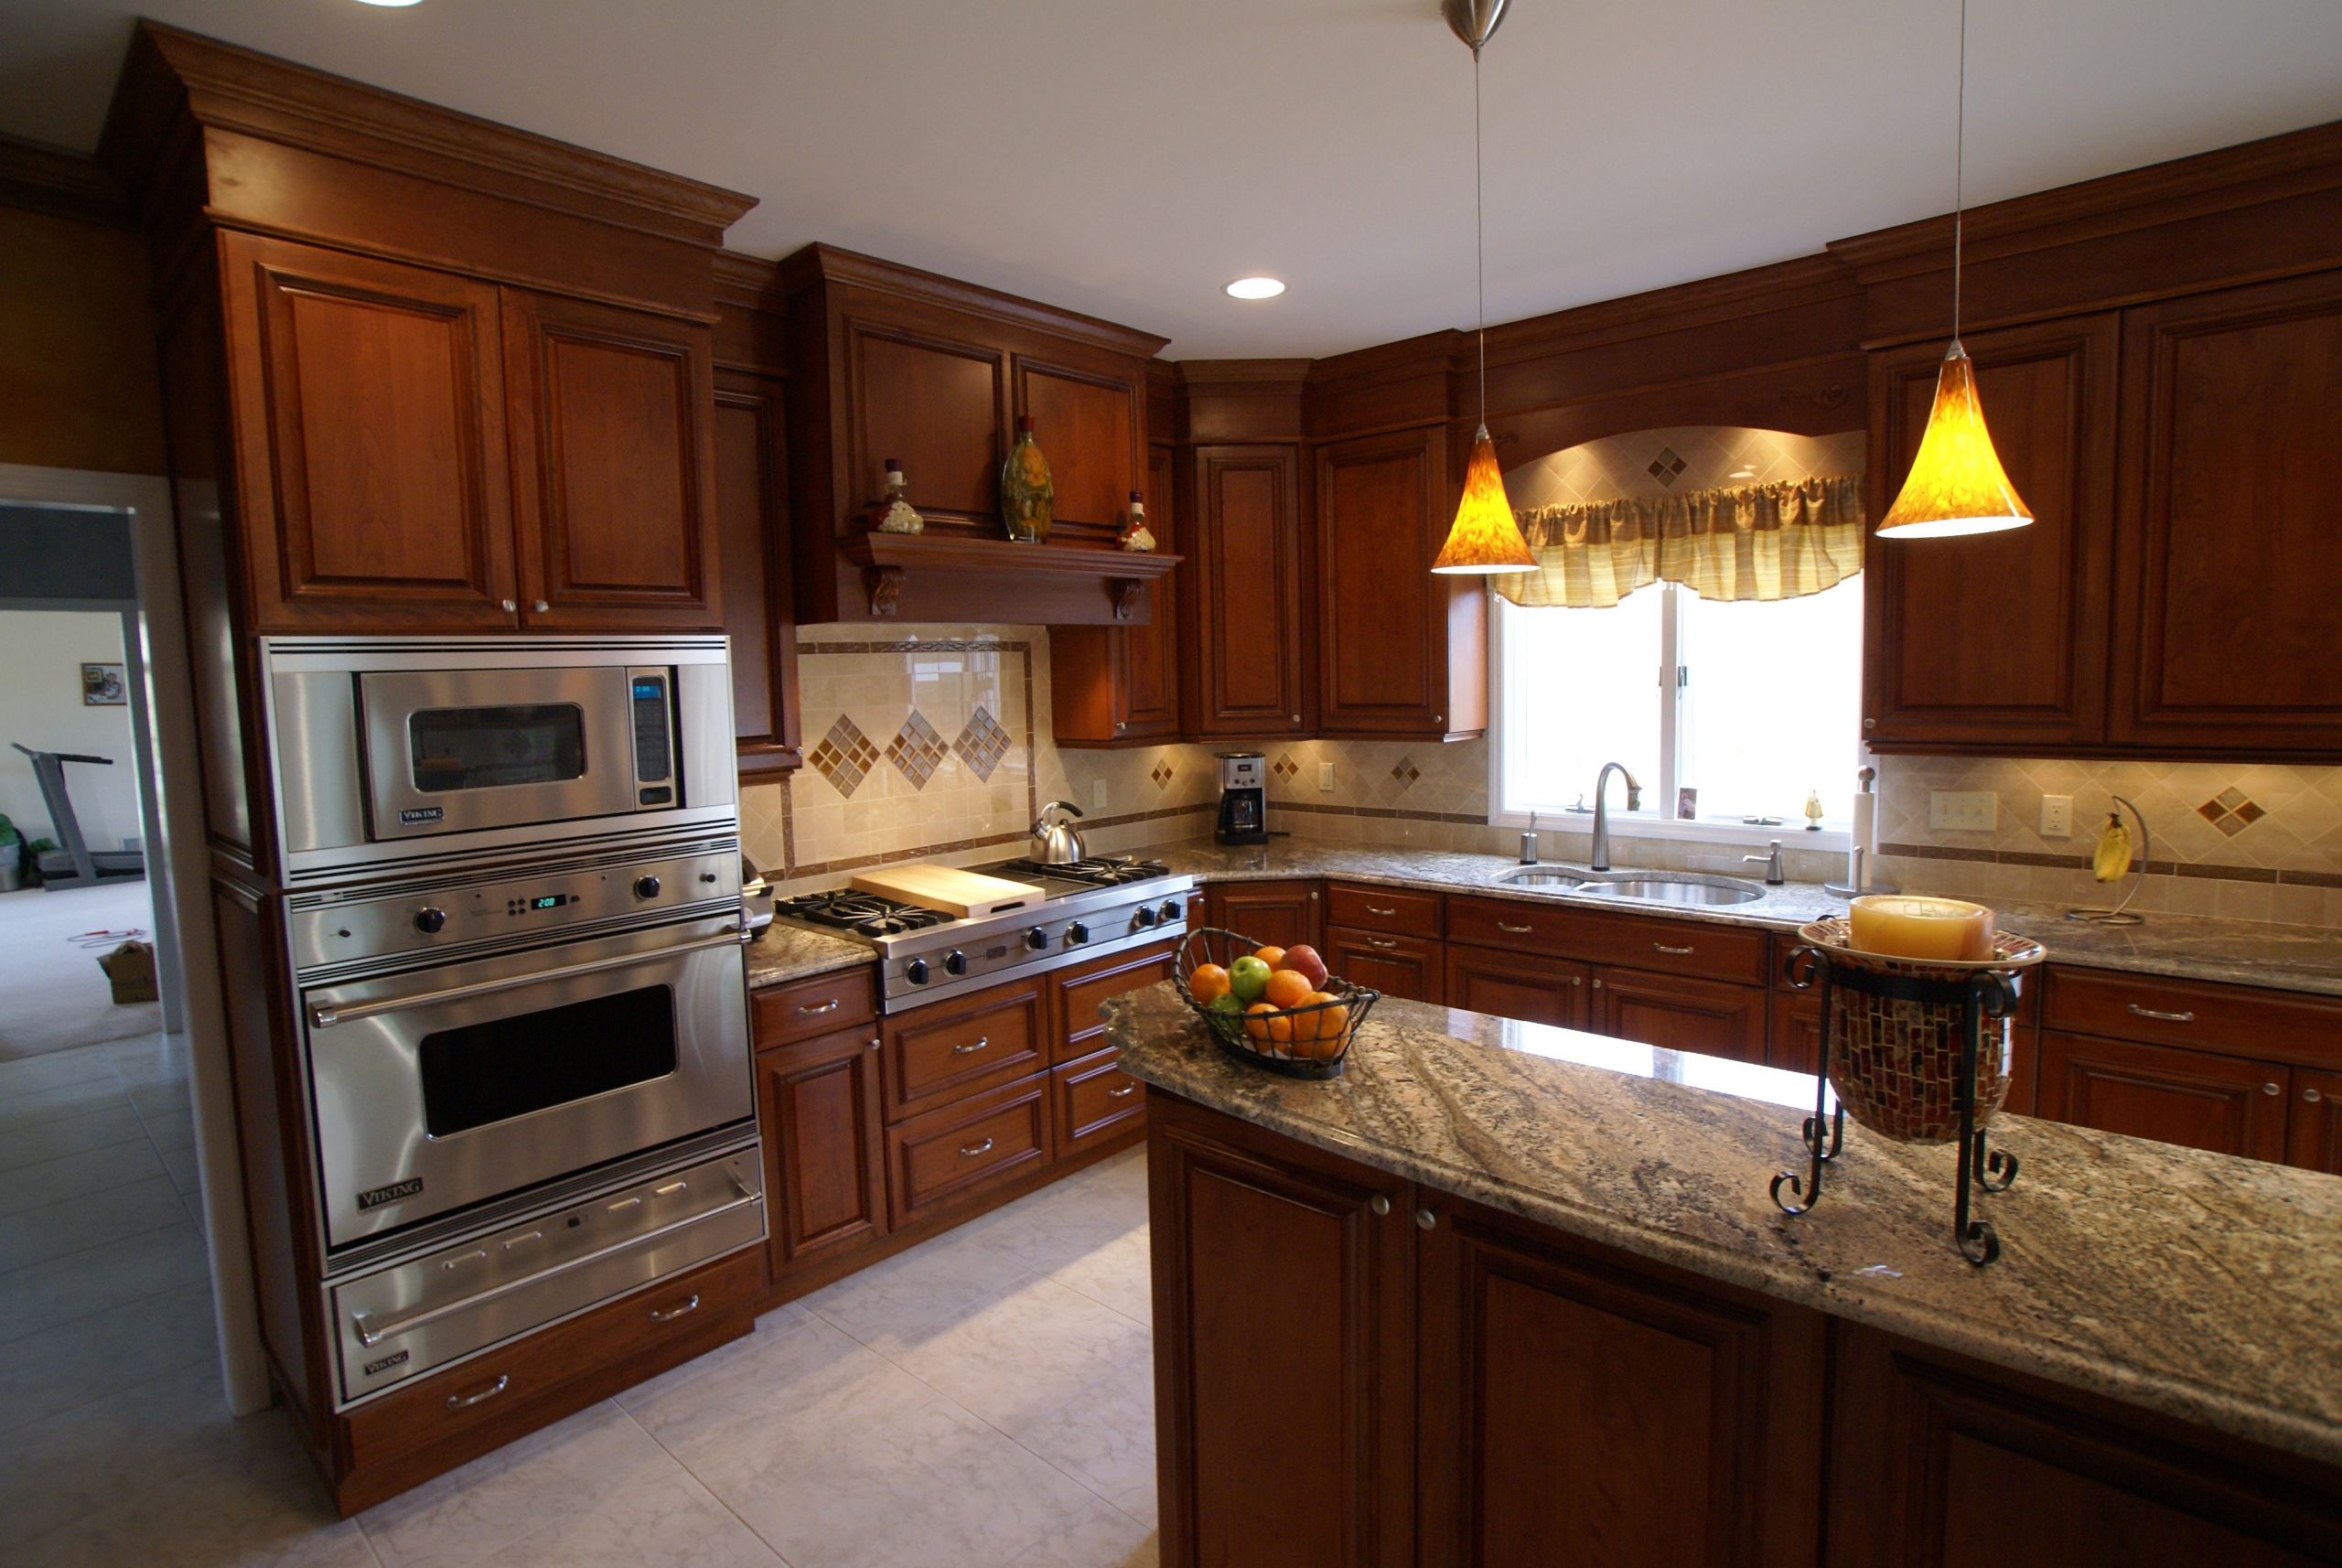 Kitchen Redesign Ideas
 Monmouth County Kitchen Remodeling Ideas to Inspire You